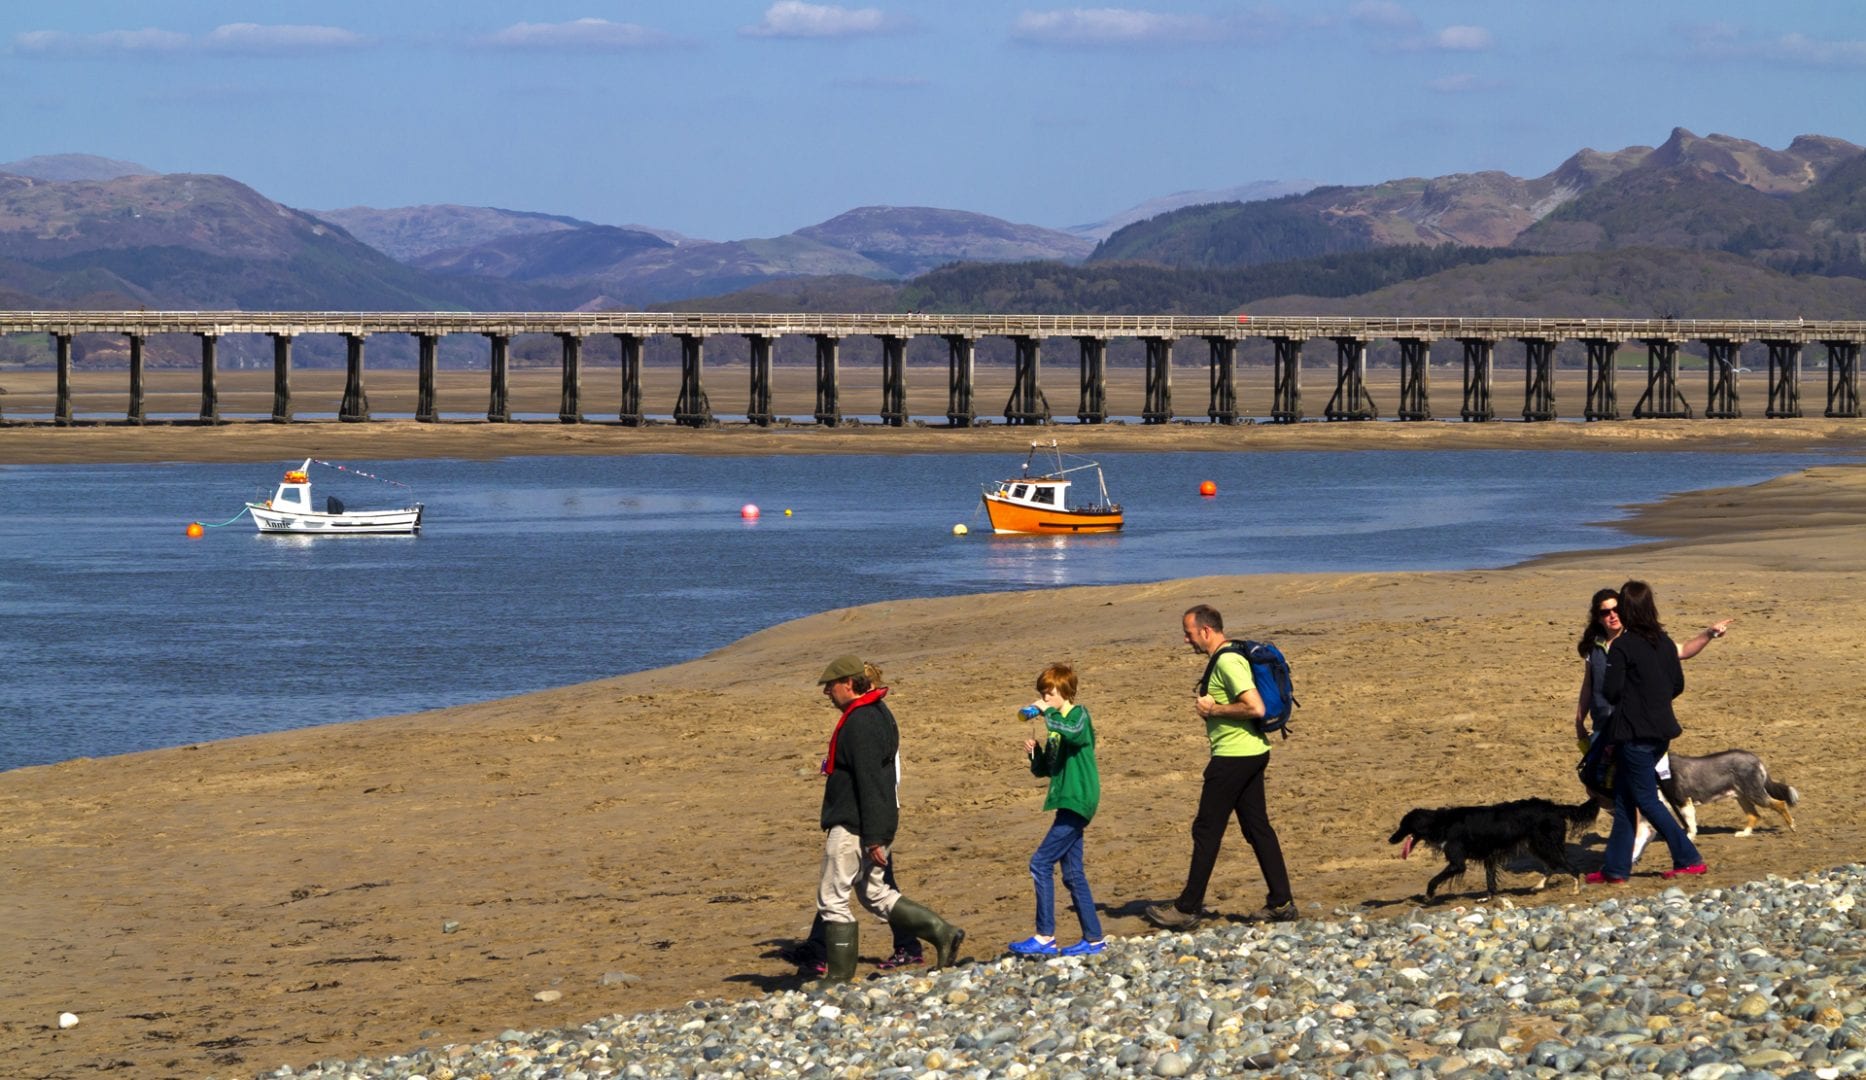 barmouth viaduct will be restored in 2021